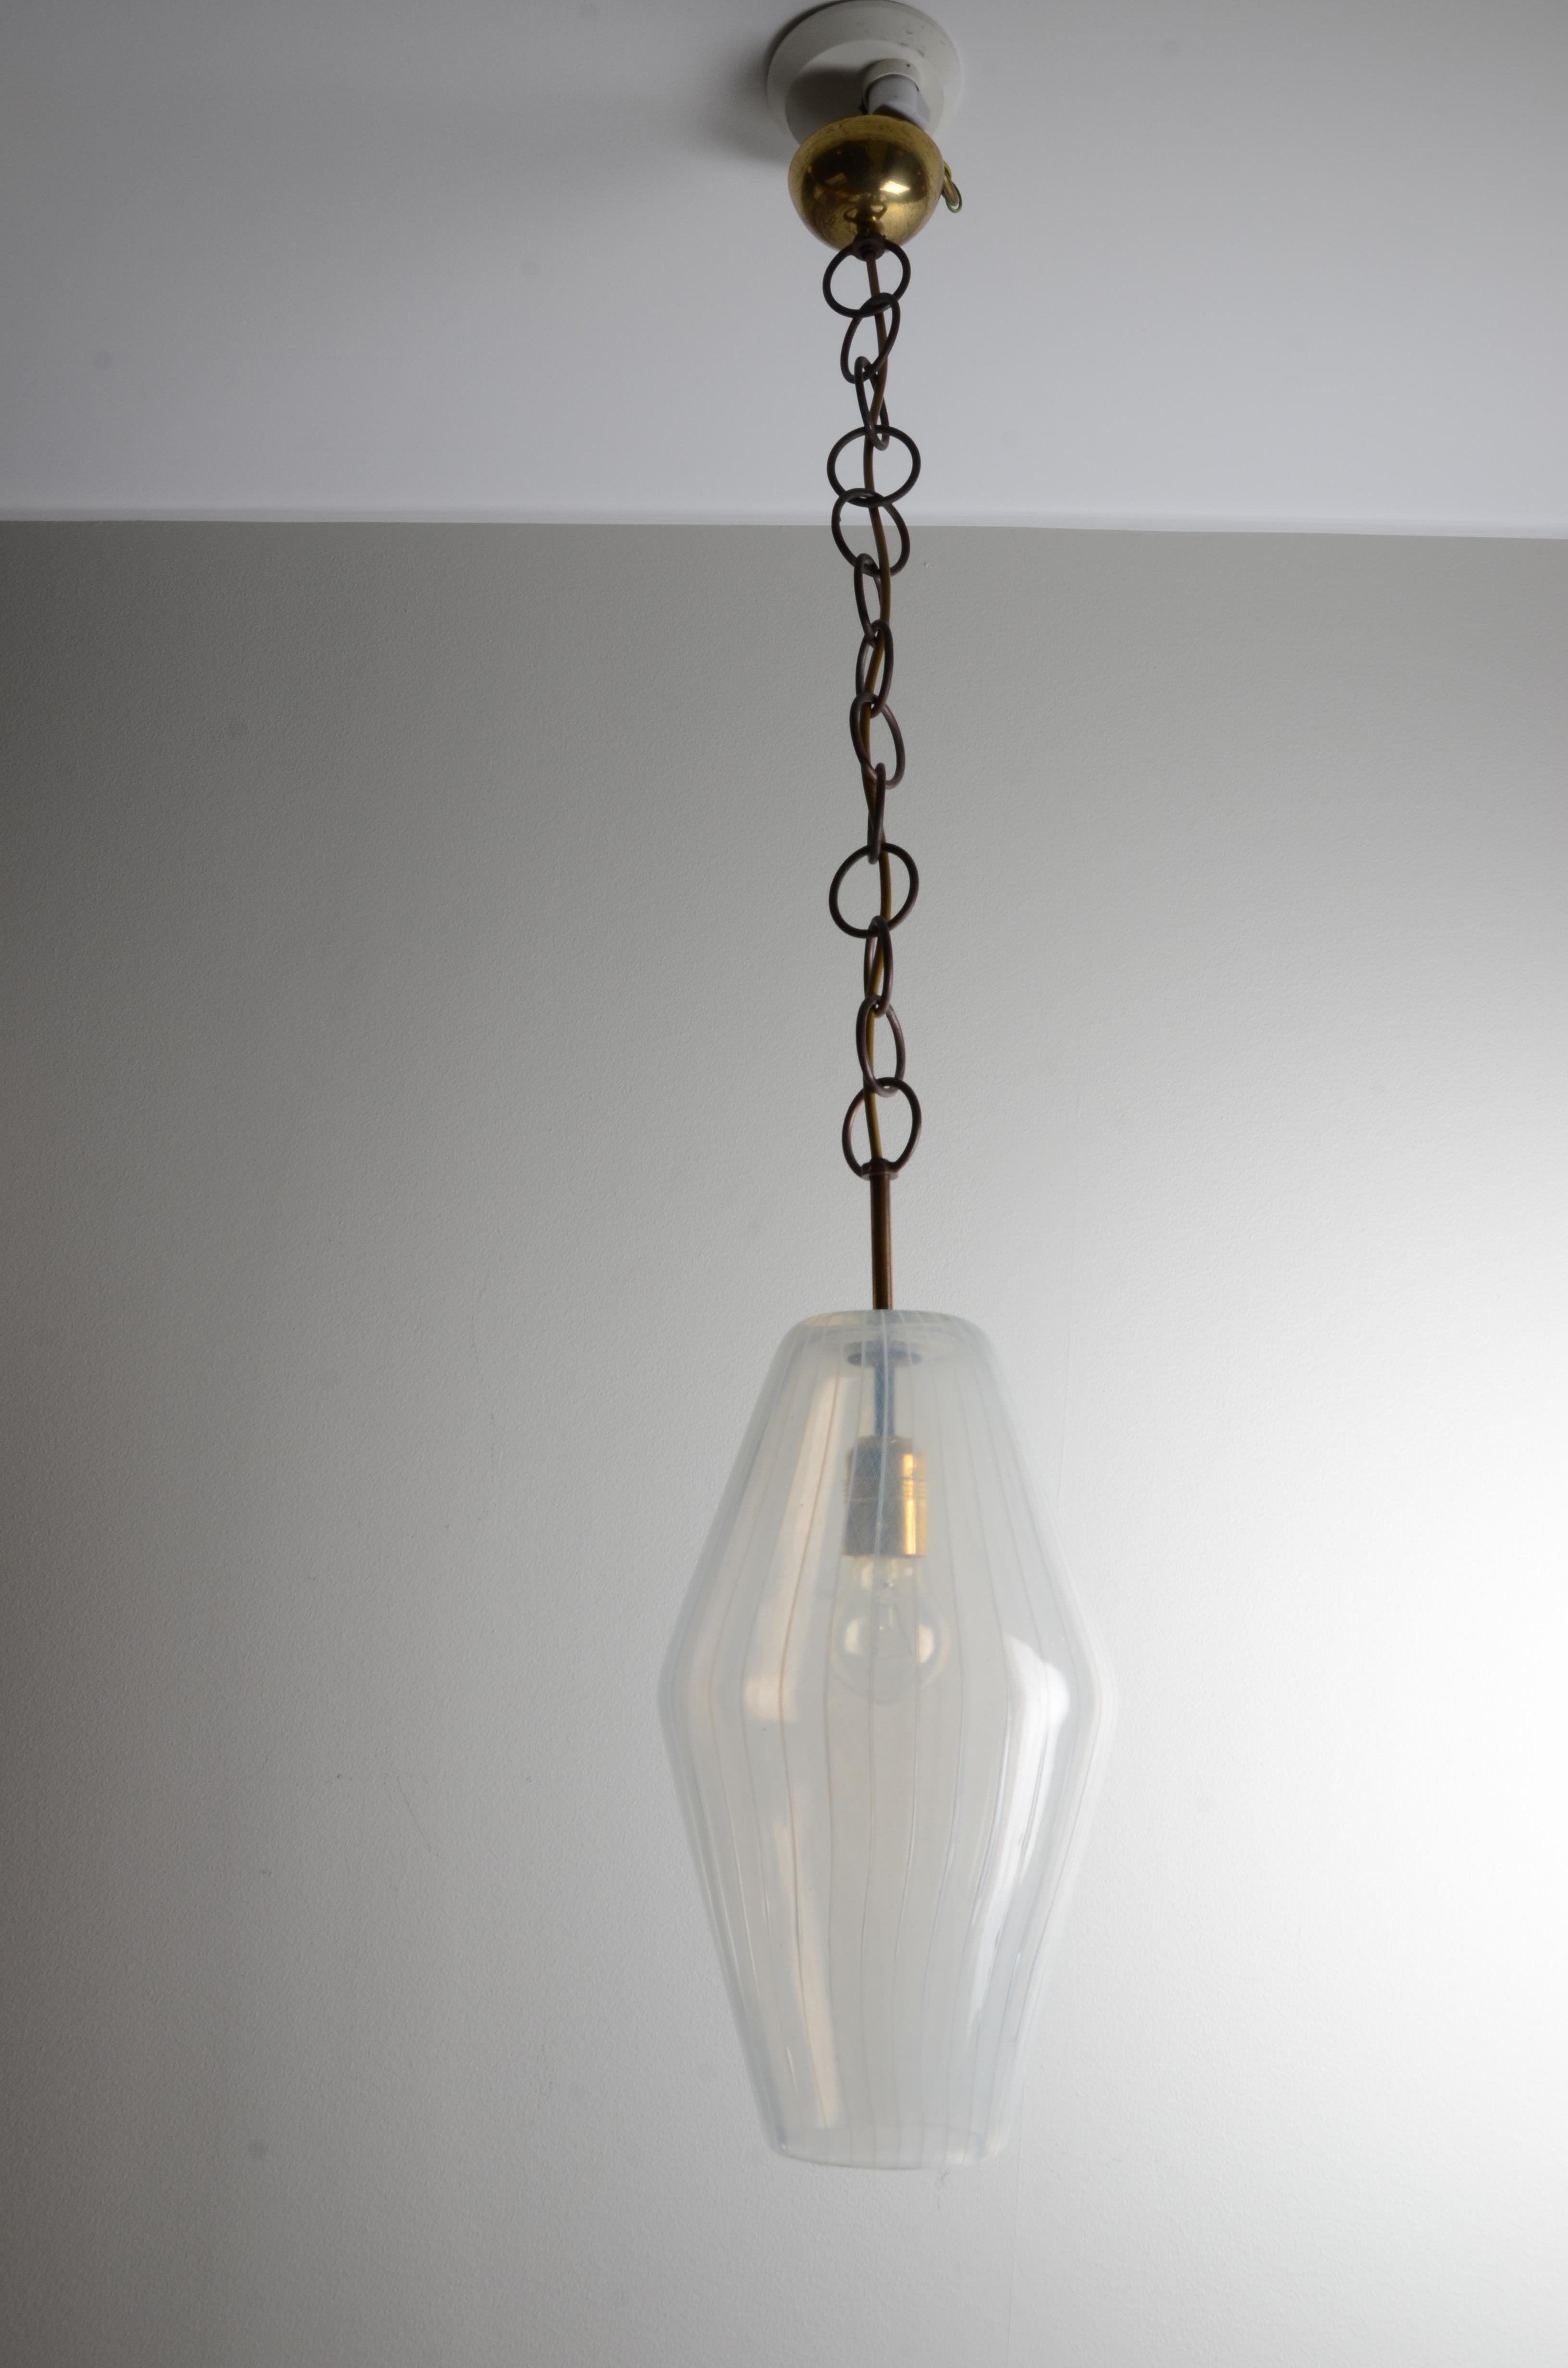 Pendant in Murano glass, by Paolo Venini, Italy 1950s.

Total height 100 cm.